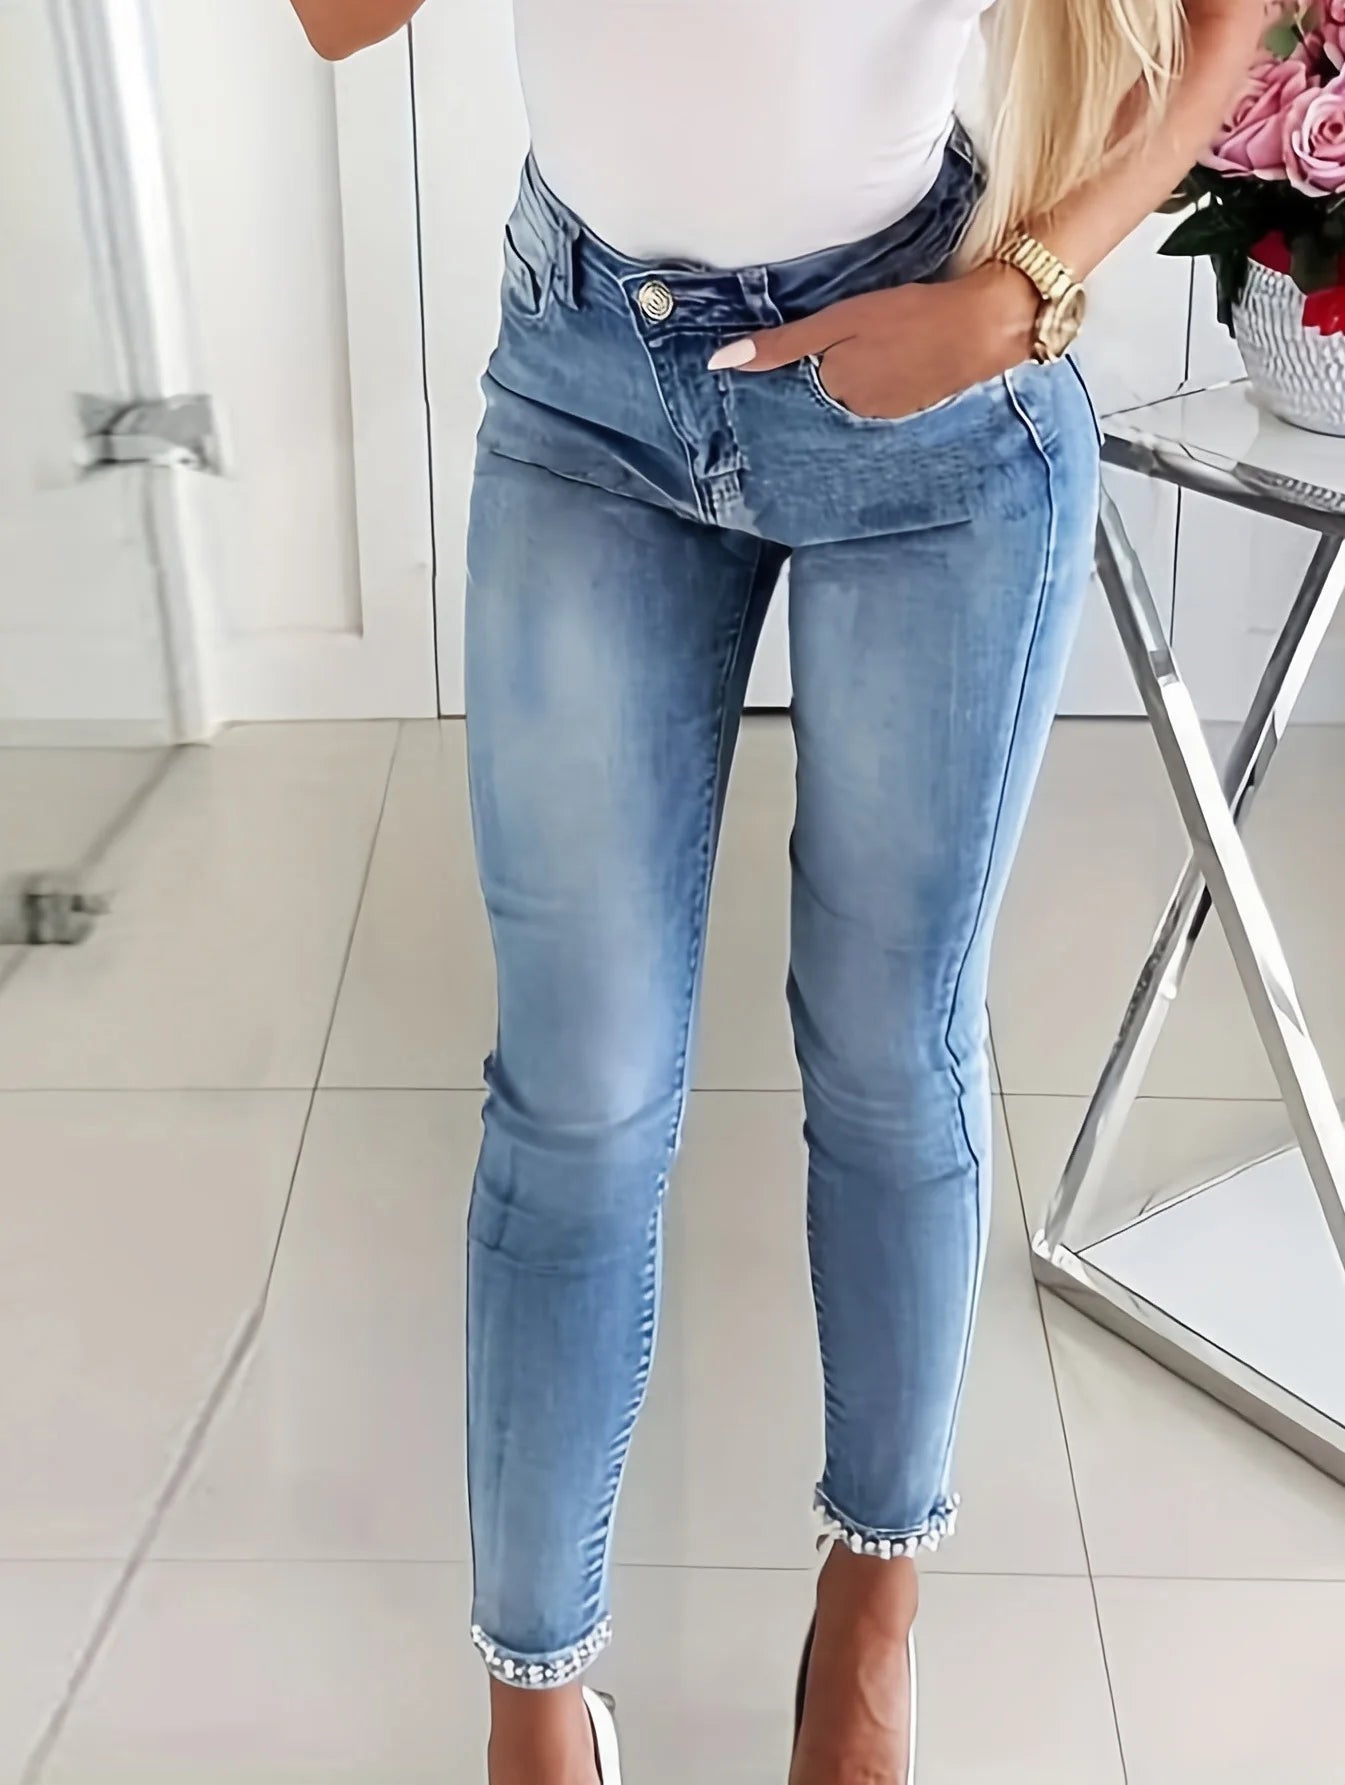 Amy Fashion - Women's Blue High-Stretch Skinny with Faux Pearl Decor and Slim Fit - Stylish and Comfortable Denim Jean